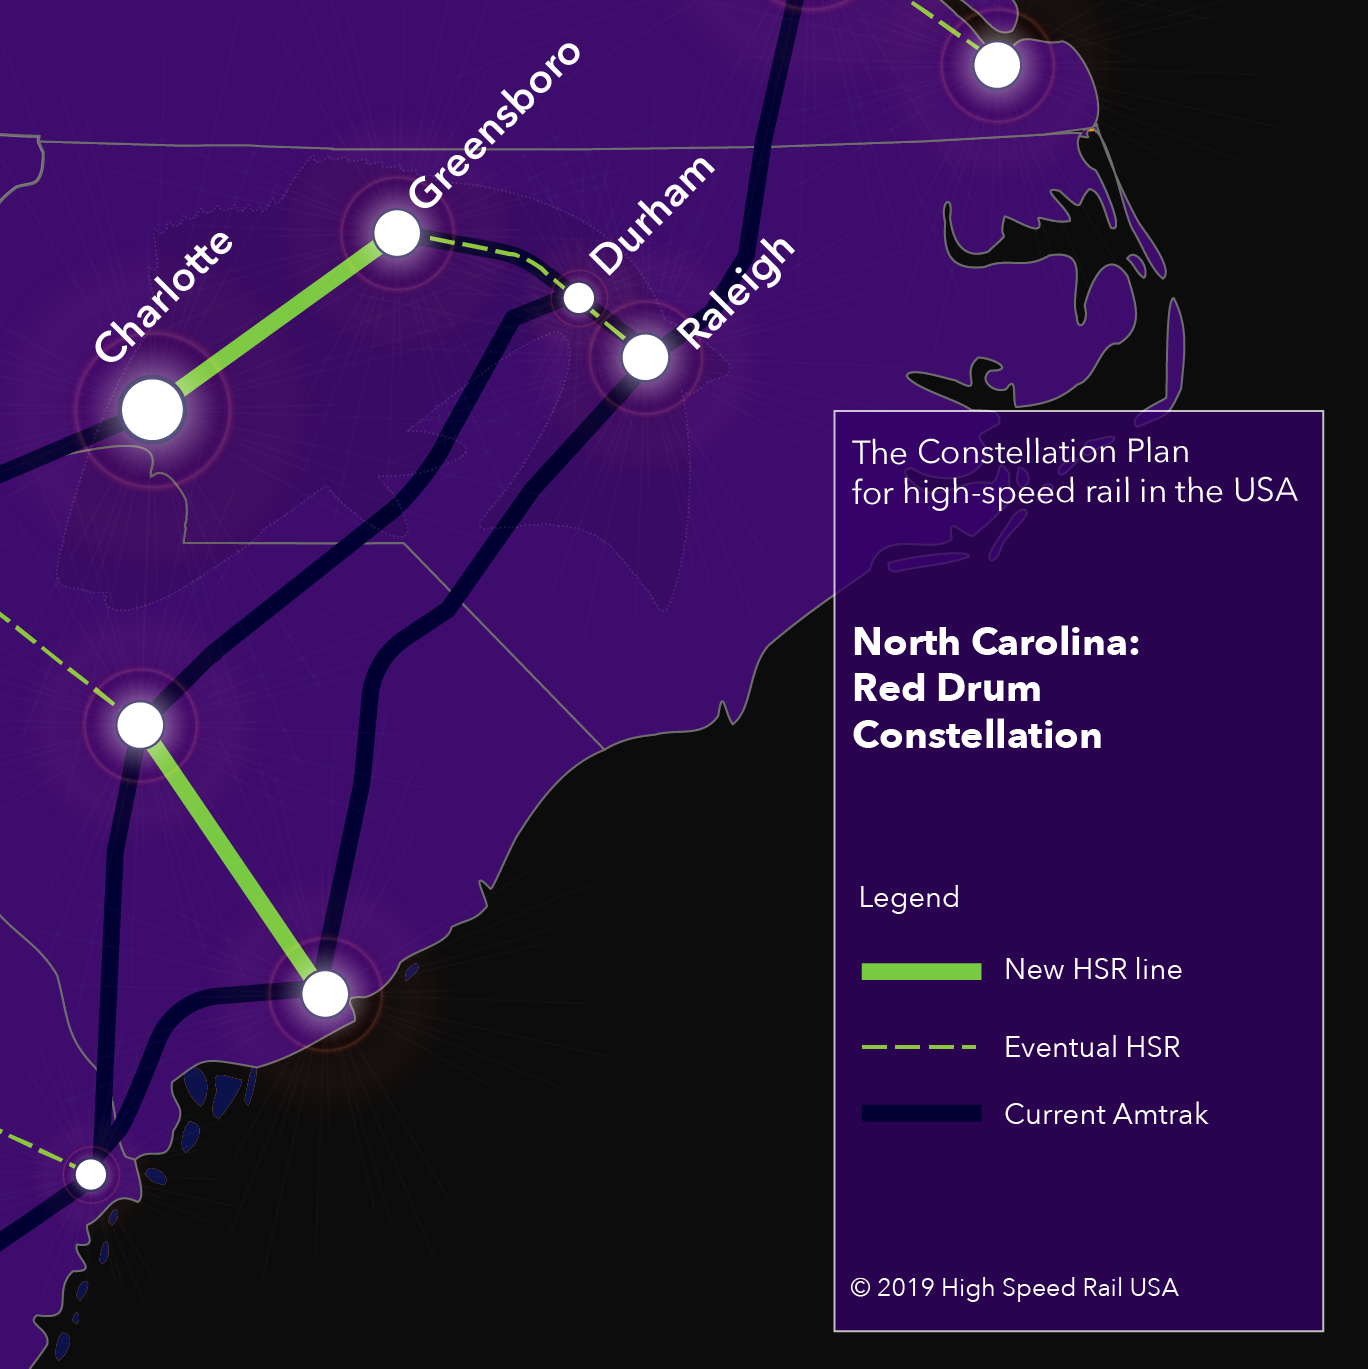 North Carolina - The Red Drum Constellation for high-speed rail